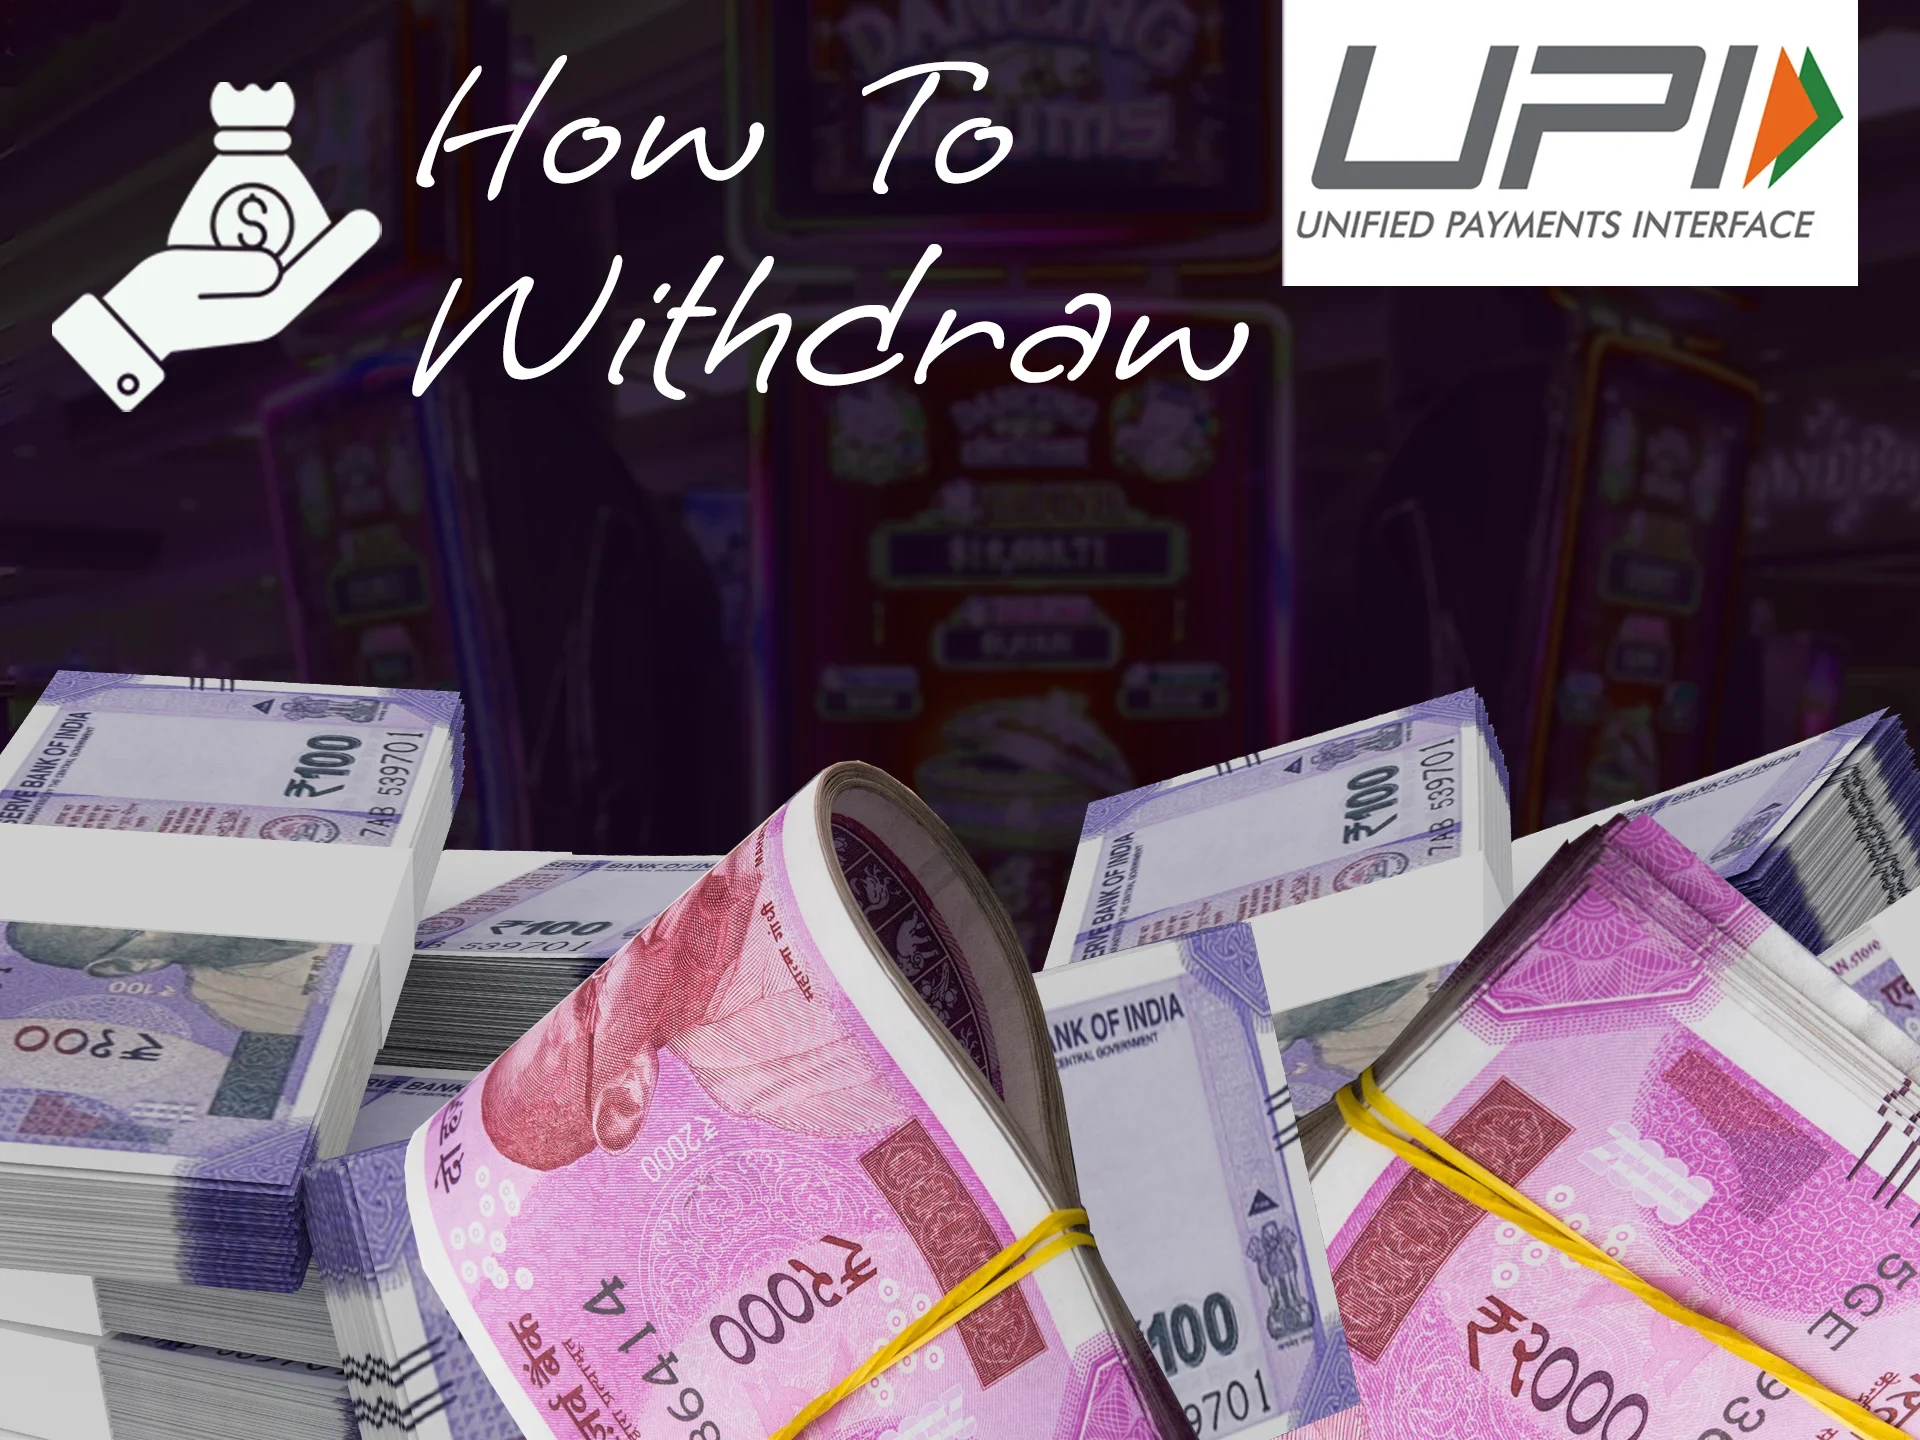 Make a withdrawal using the UPI payment system.